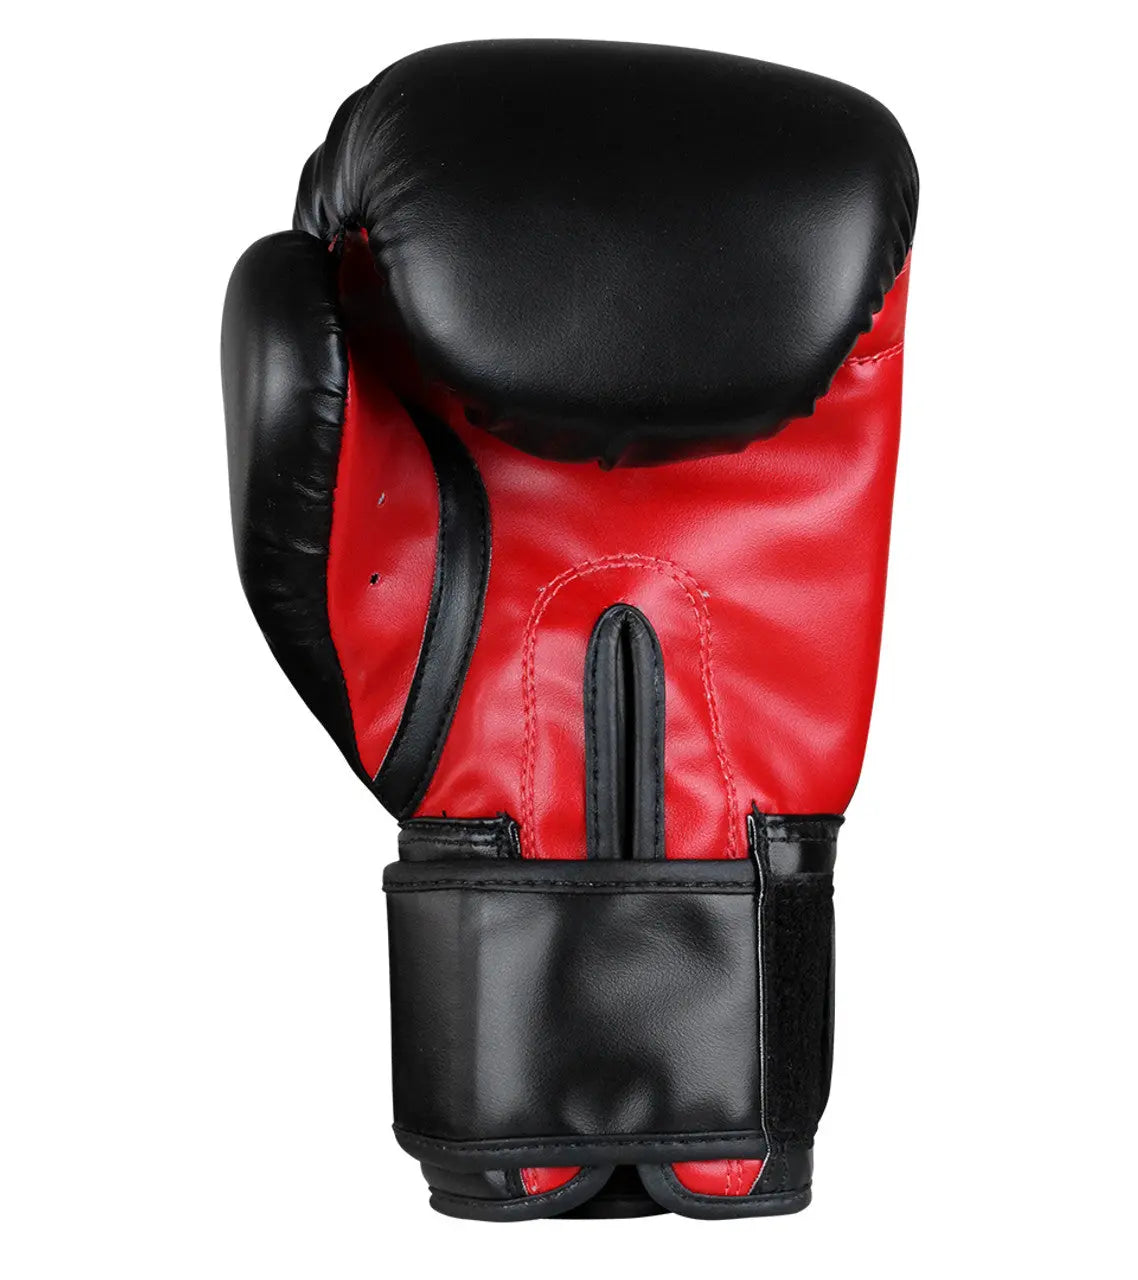 Youngstar 8oz. Youth Boxing Gloves - Prime combats YOUNGSTAR  Training Gloves